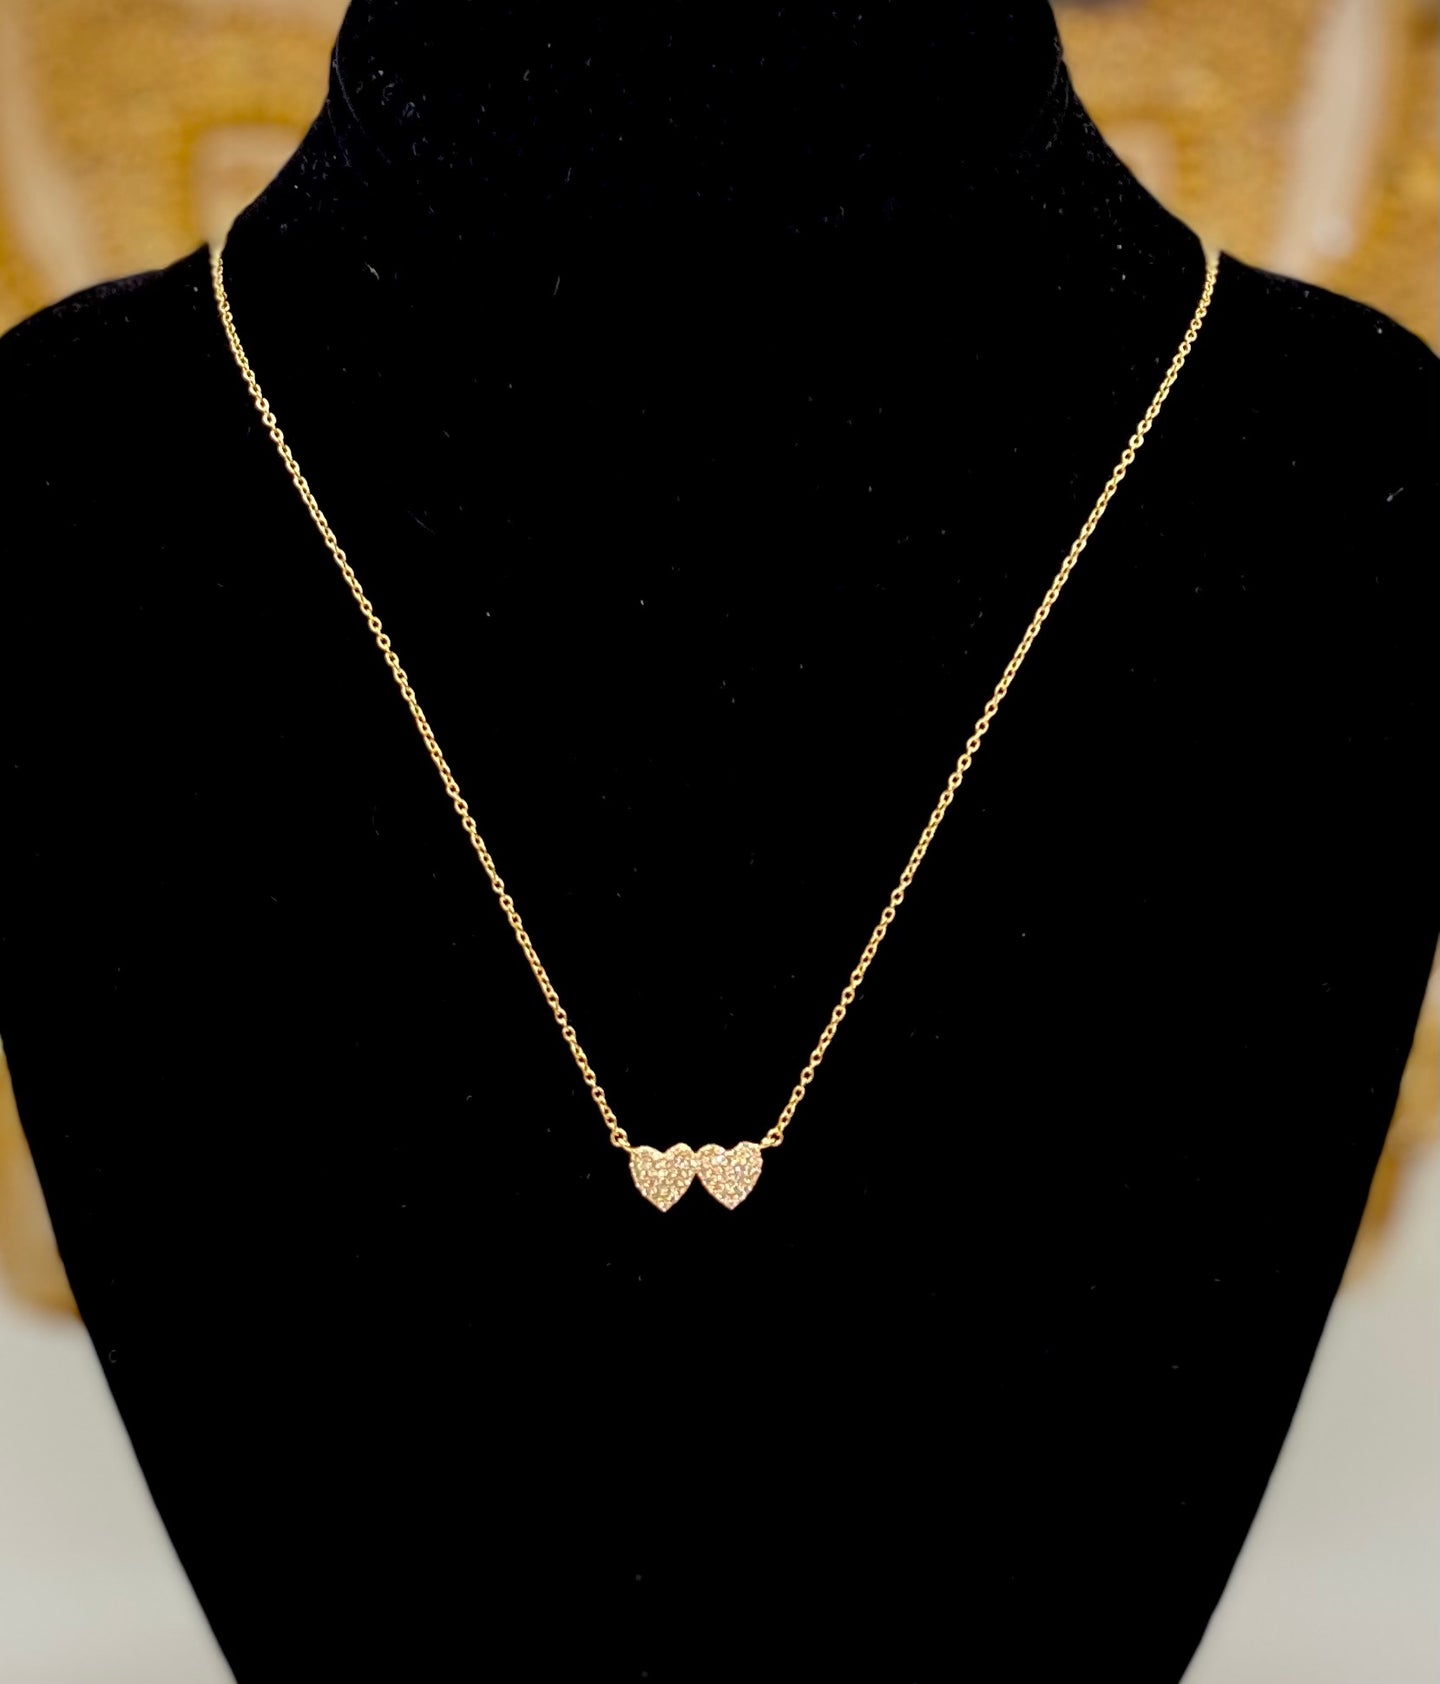 Two Hearts in One Necklace in (yellow gold or silver finish)